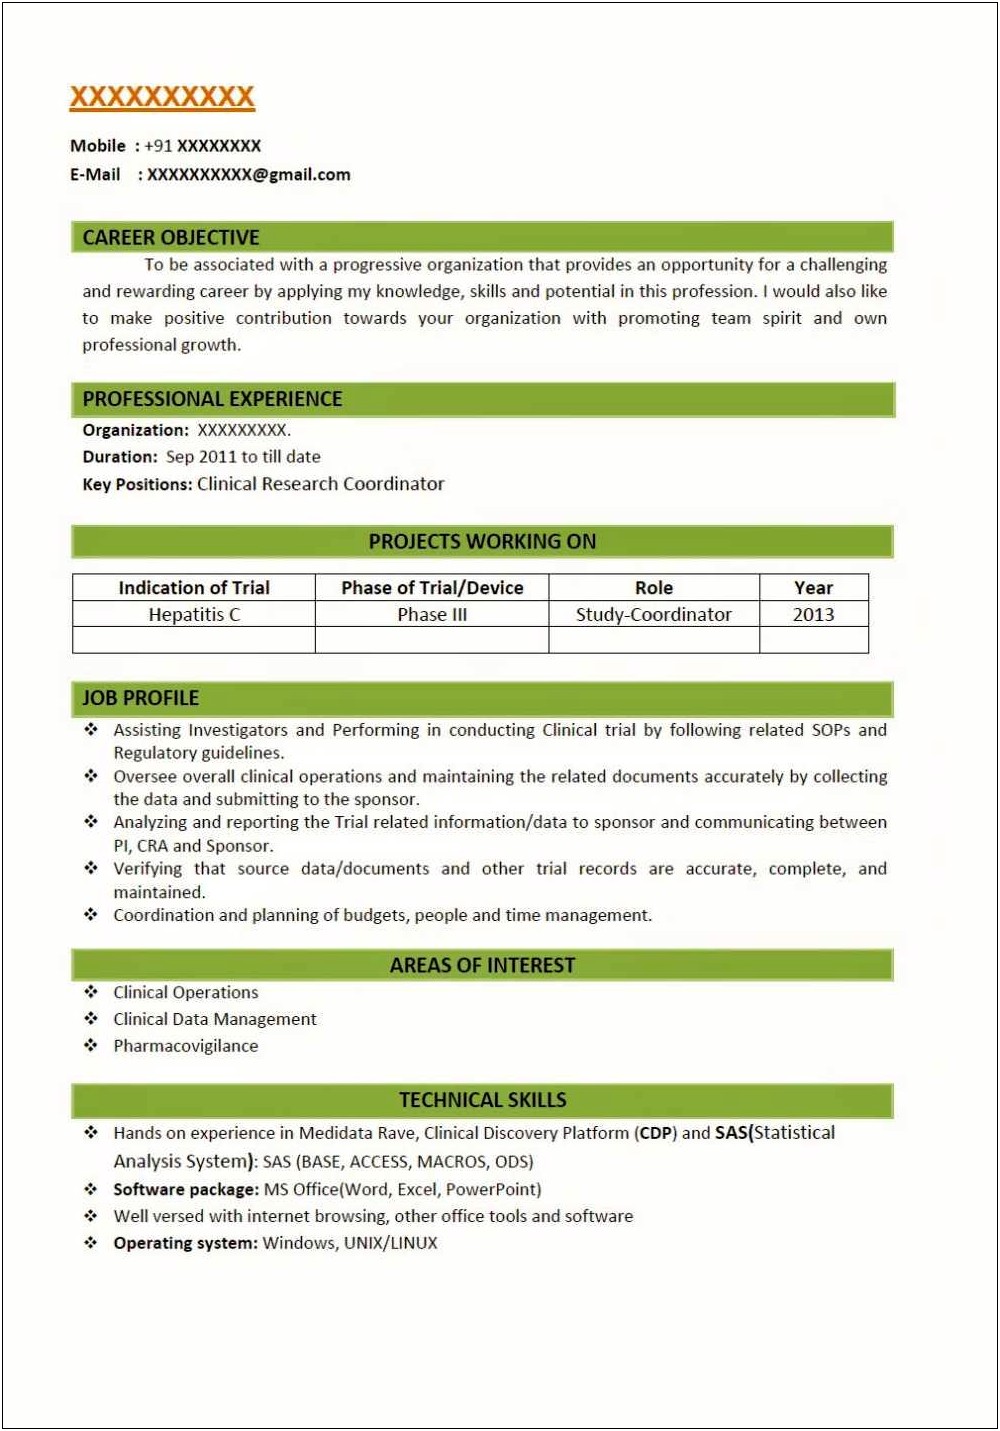 Resume To Apply For Mail Carrier Objective